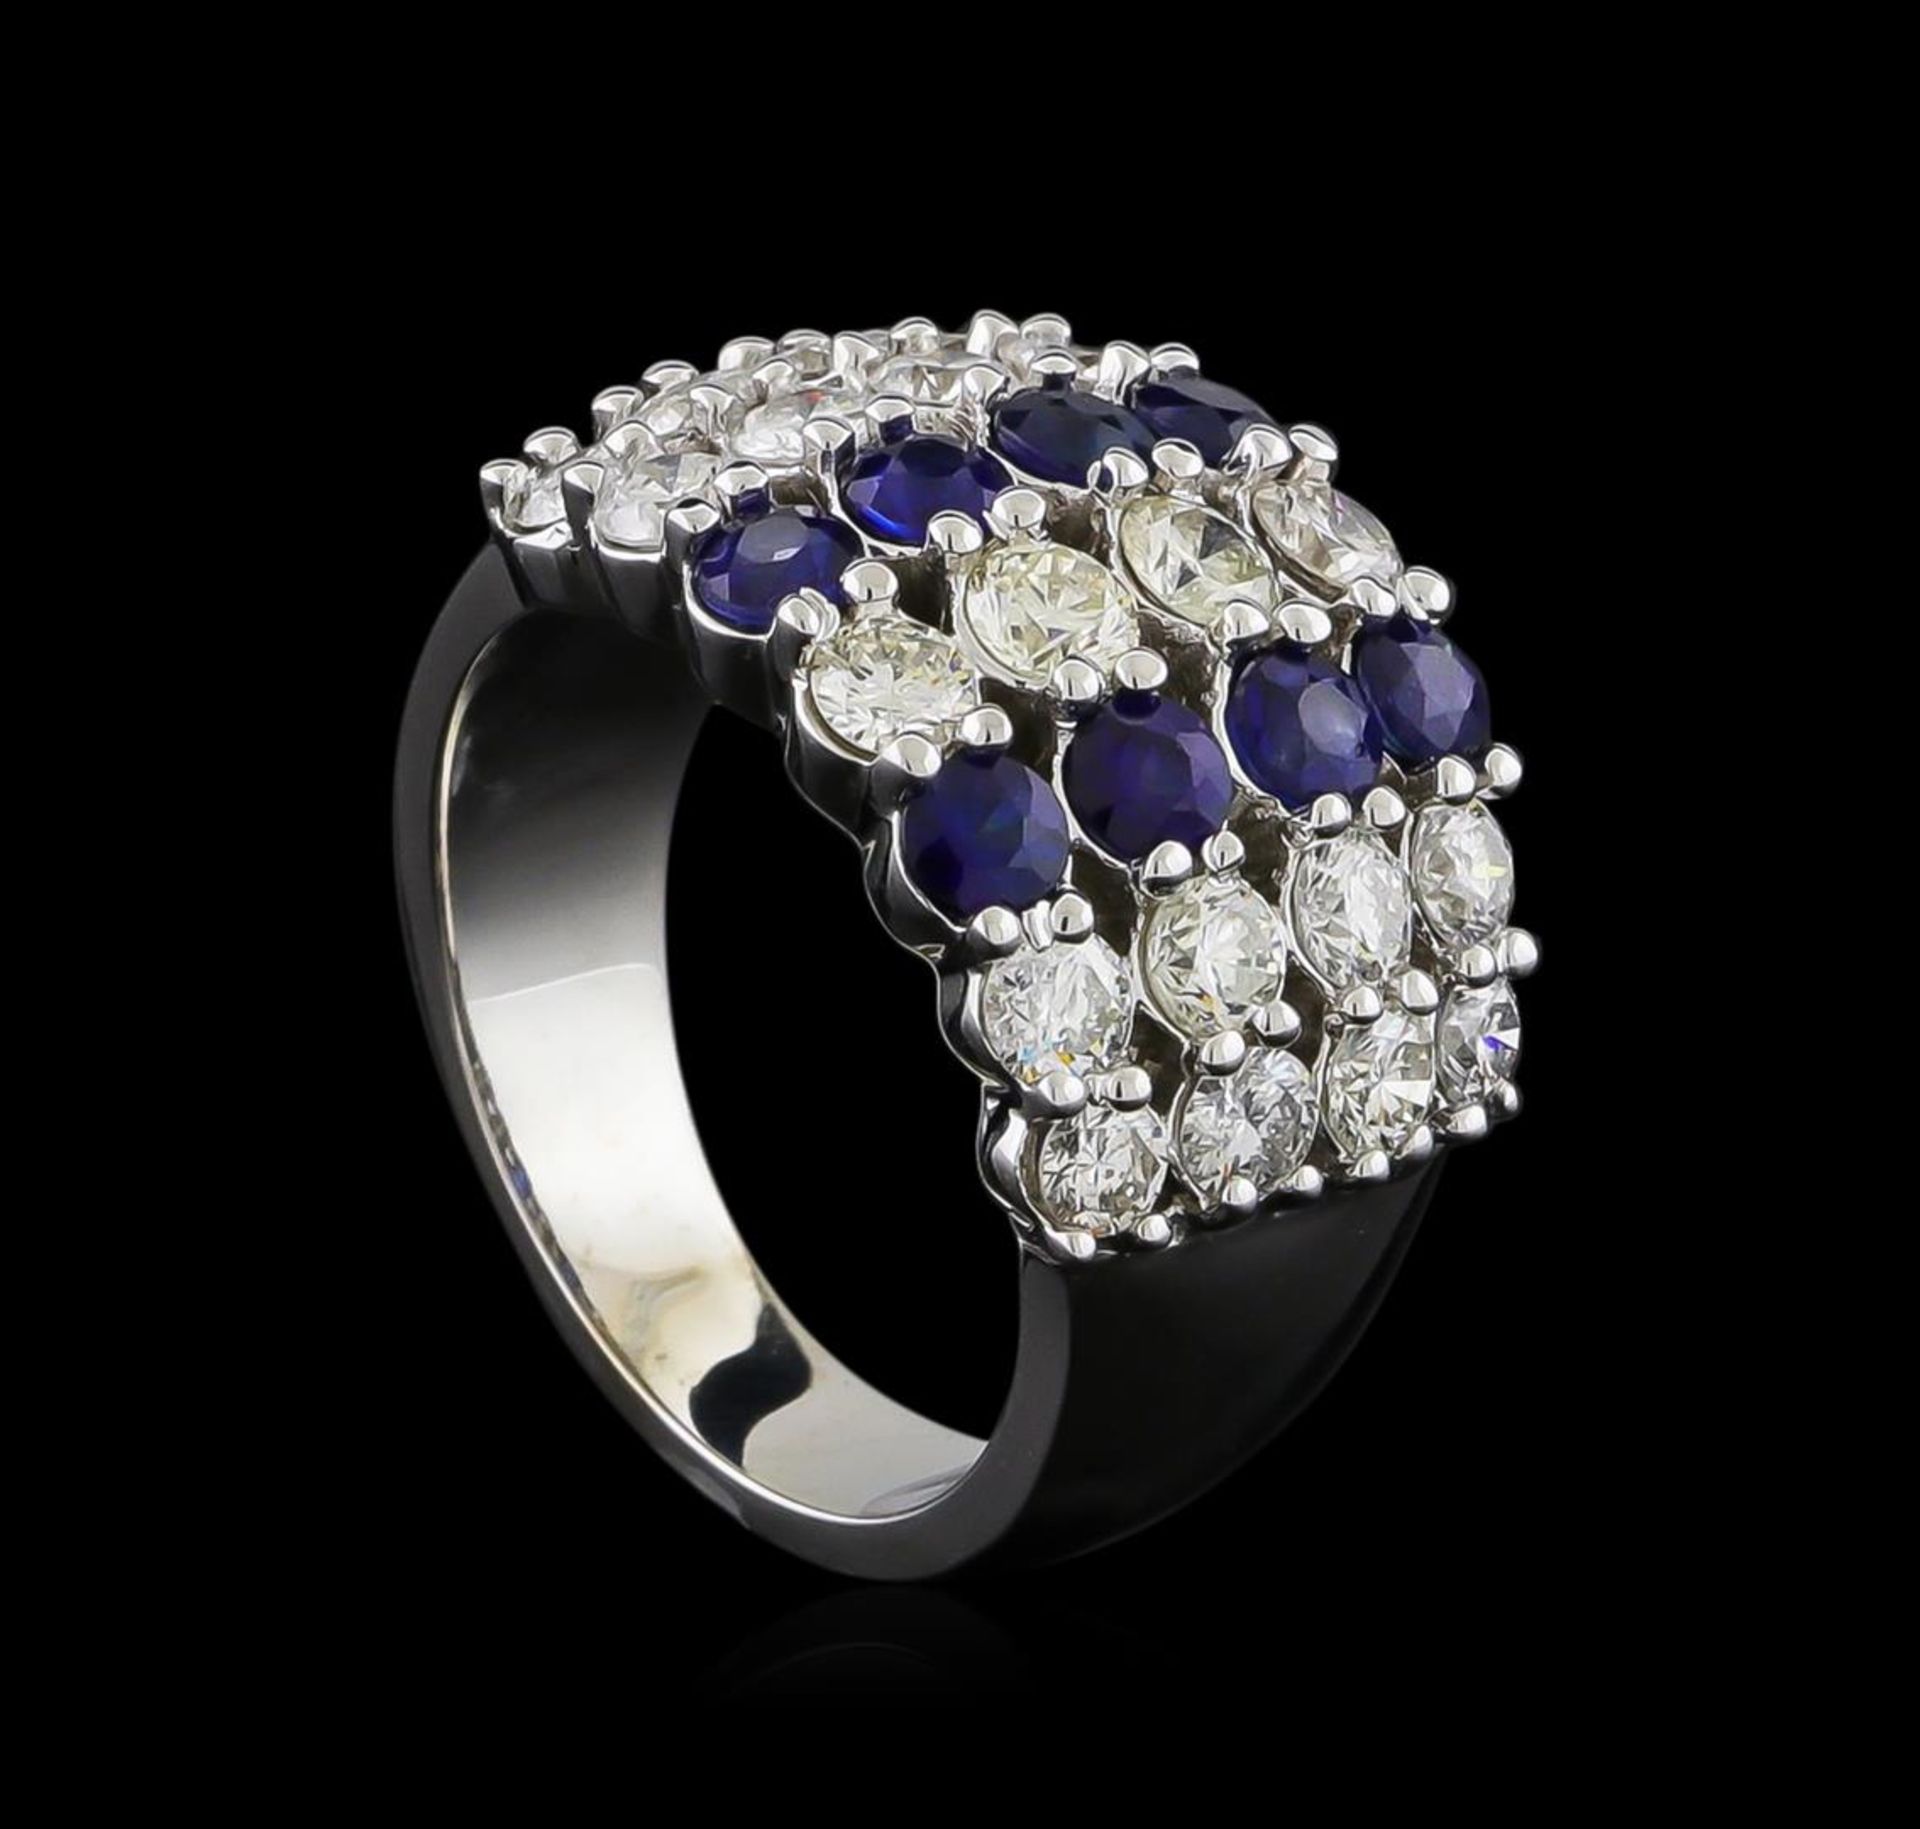 1.16 ctw Sapphire and Diamond Ring - 14KT White Gold - Image 4 of 5